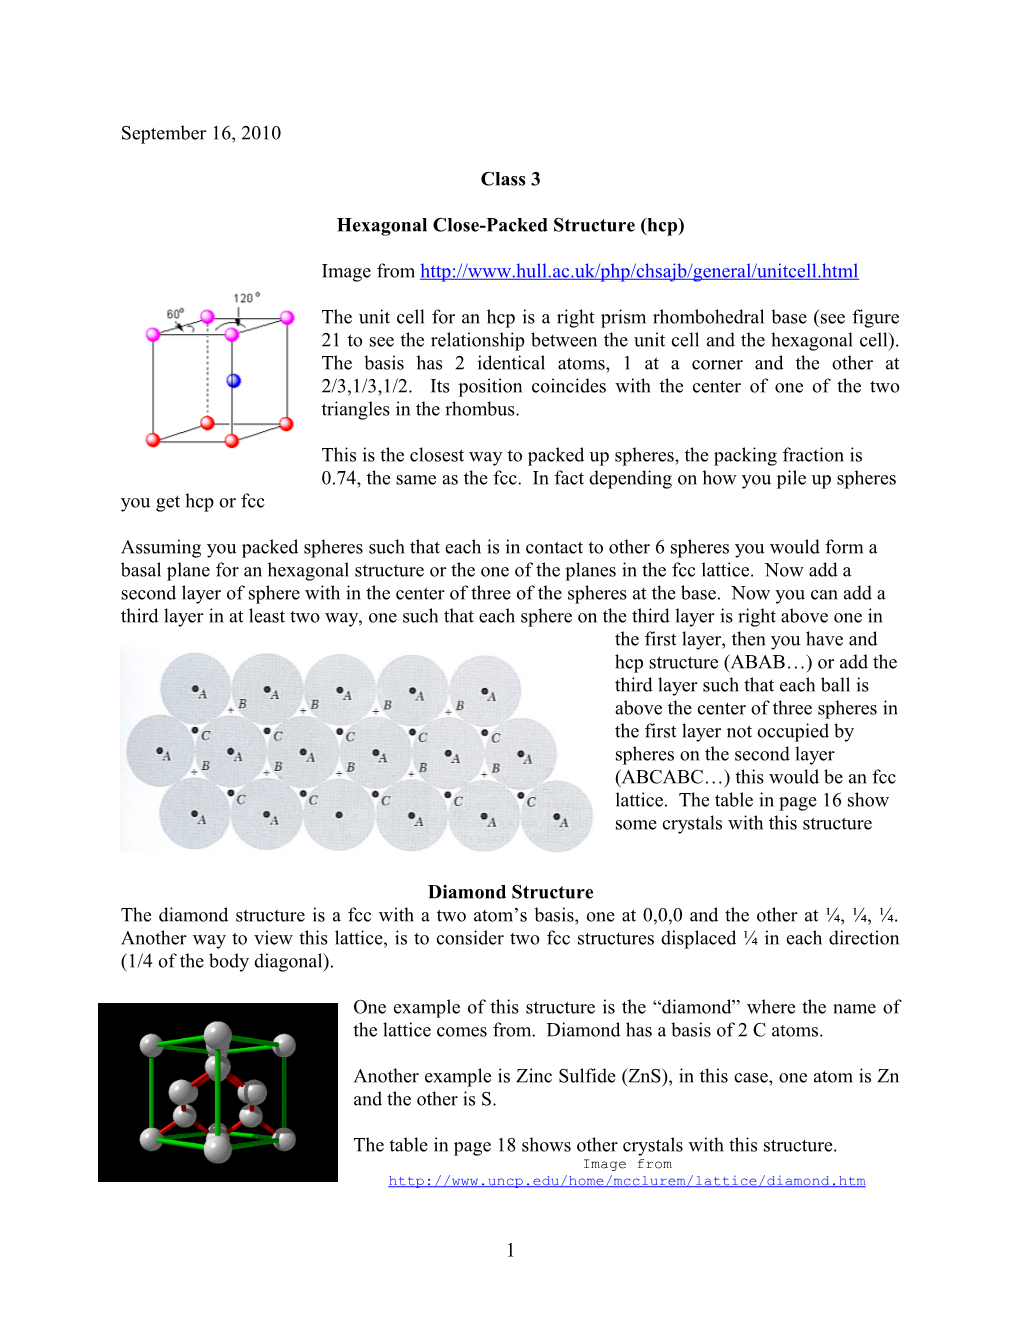 Hexagonal Close-Packed Structure (Hcp)